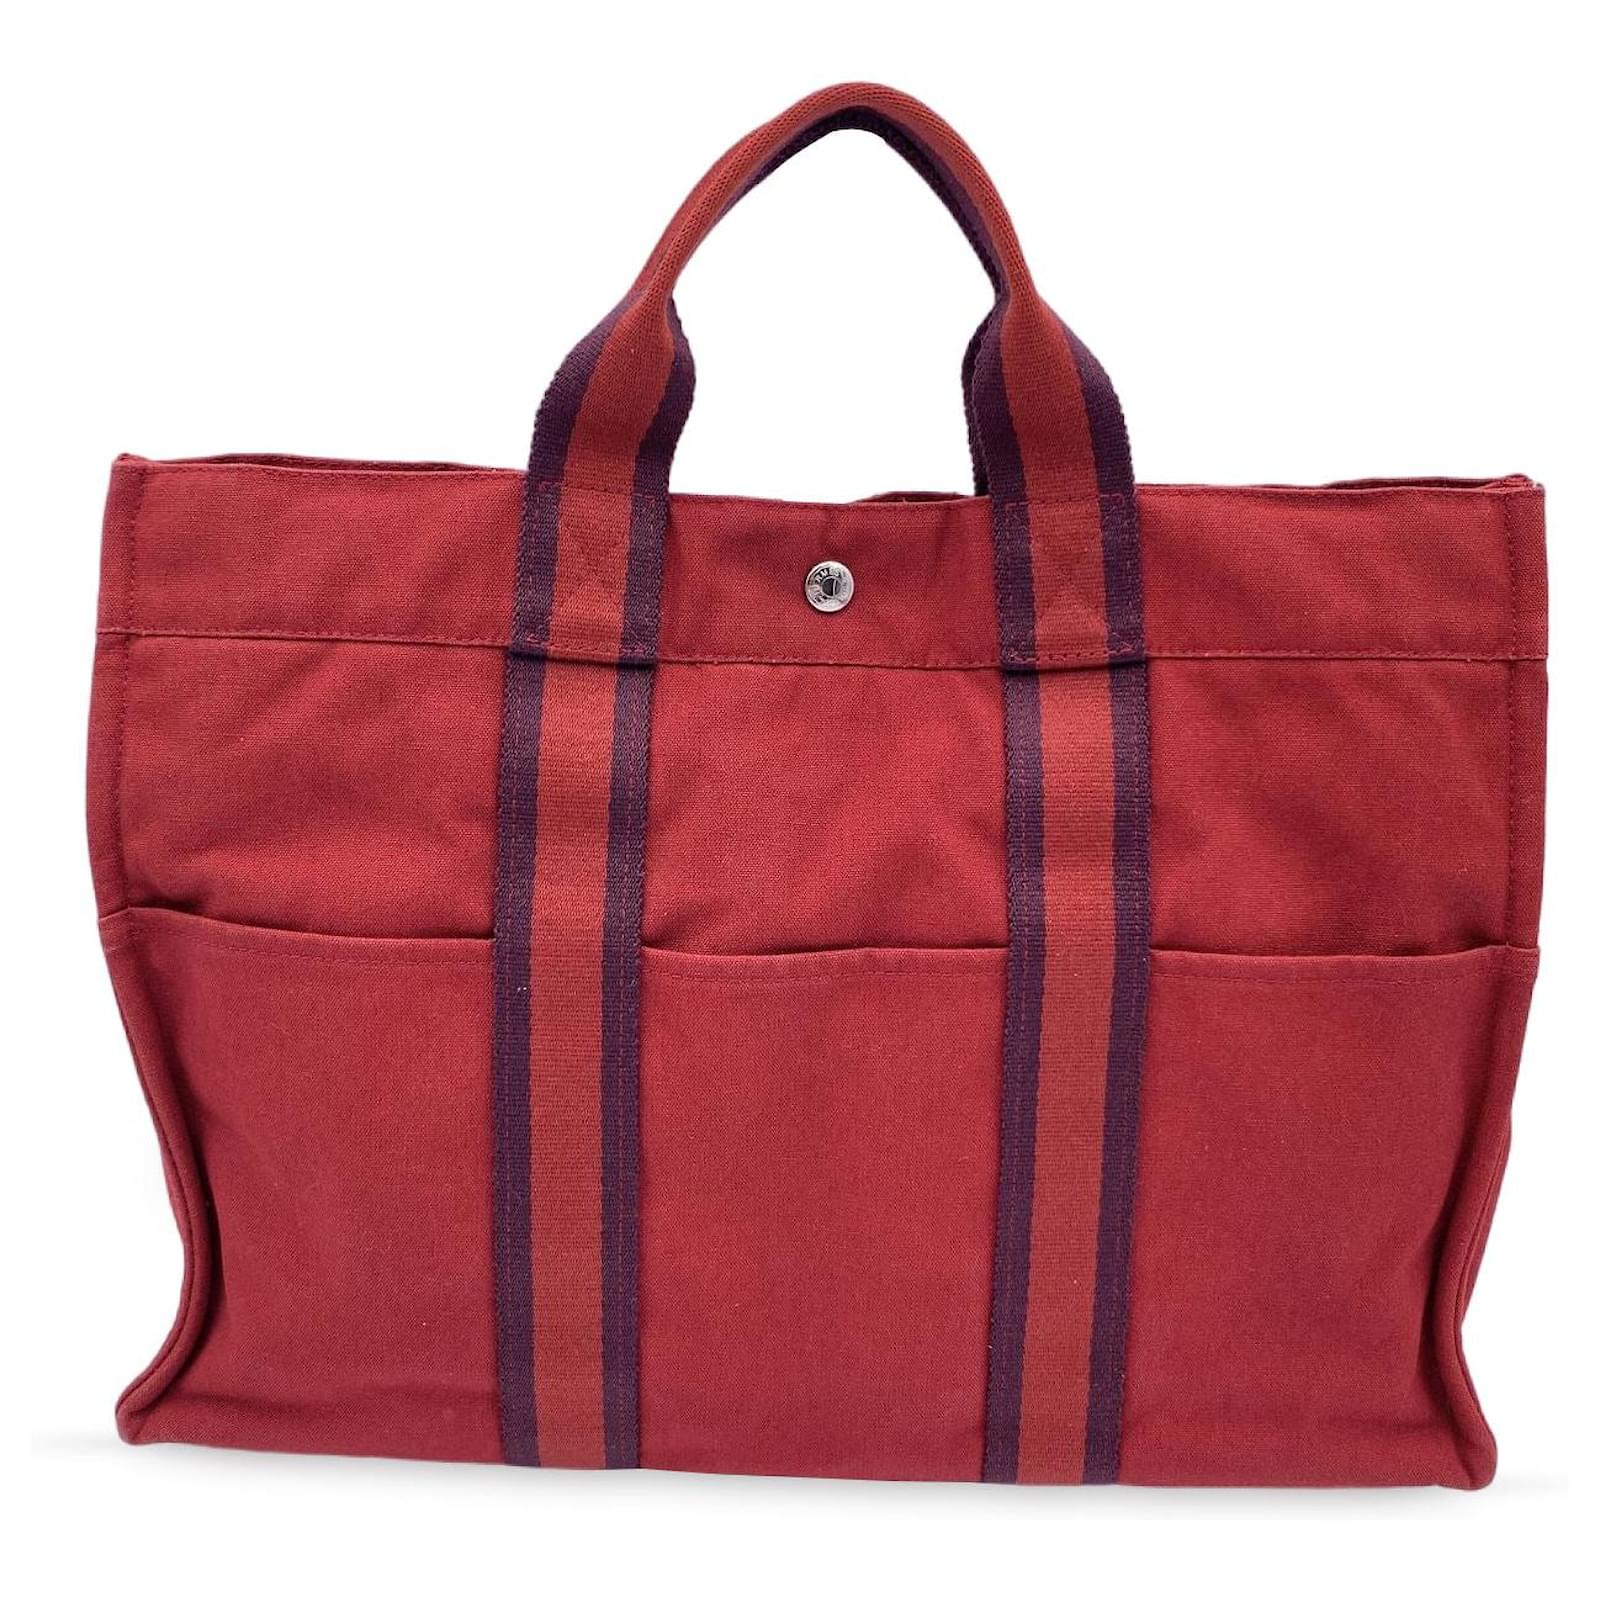 Hermes Hermes Fourre Tout MM Red Cotton Canvas Tote Hand Bag